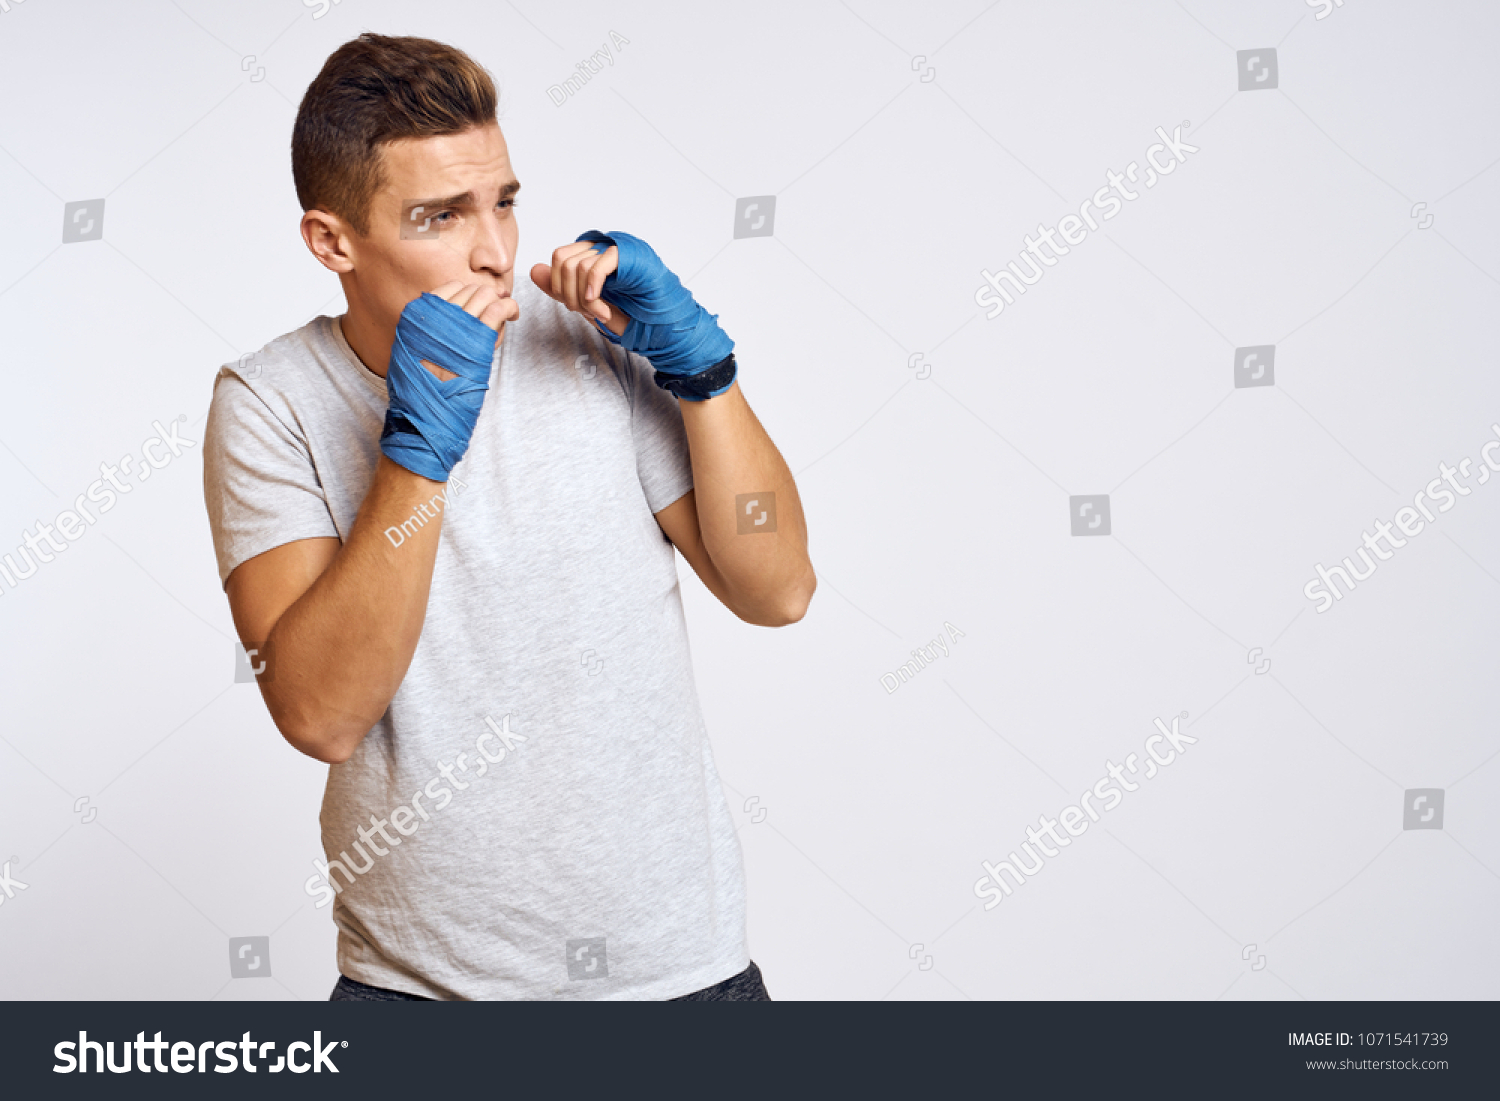   boxer with protection on hands, boxing                              #1071541739